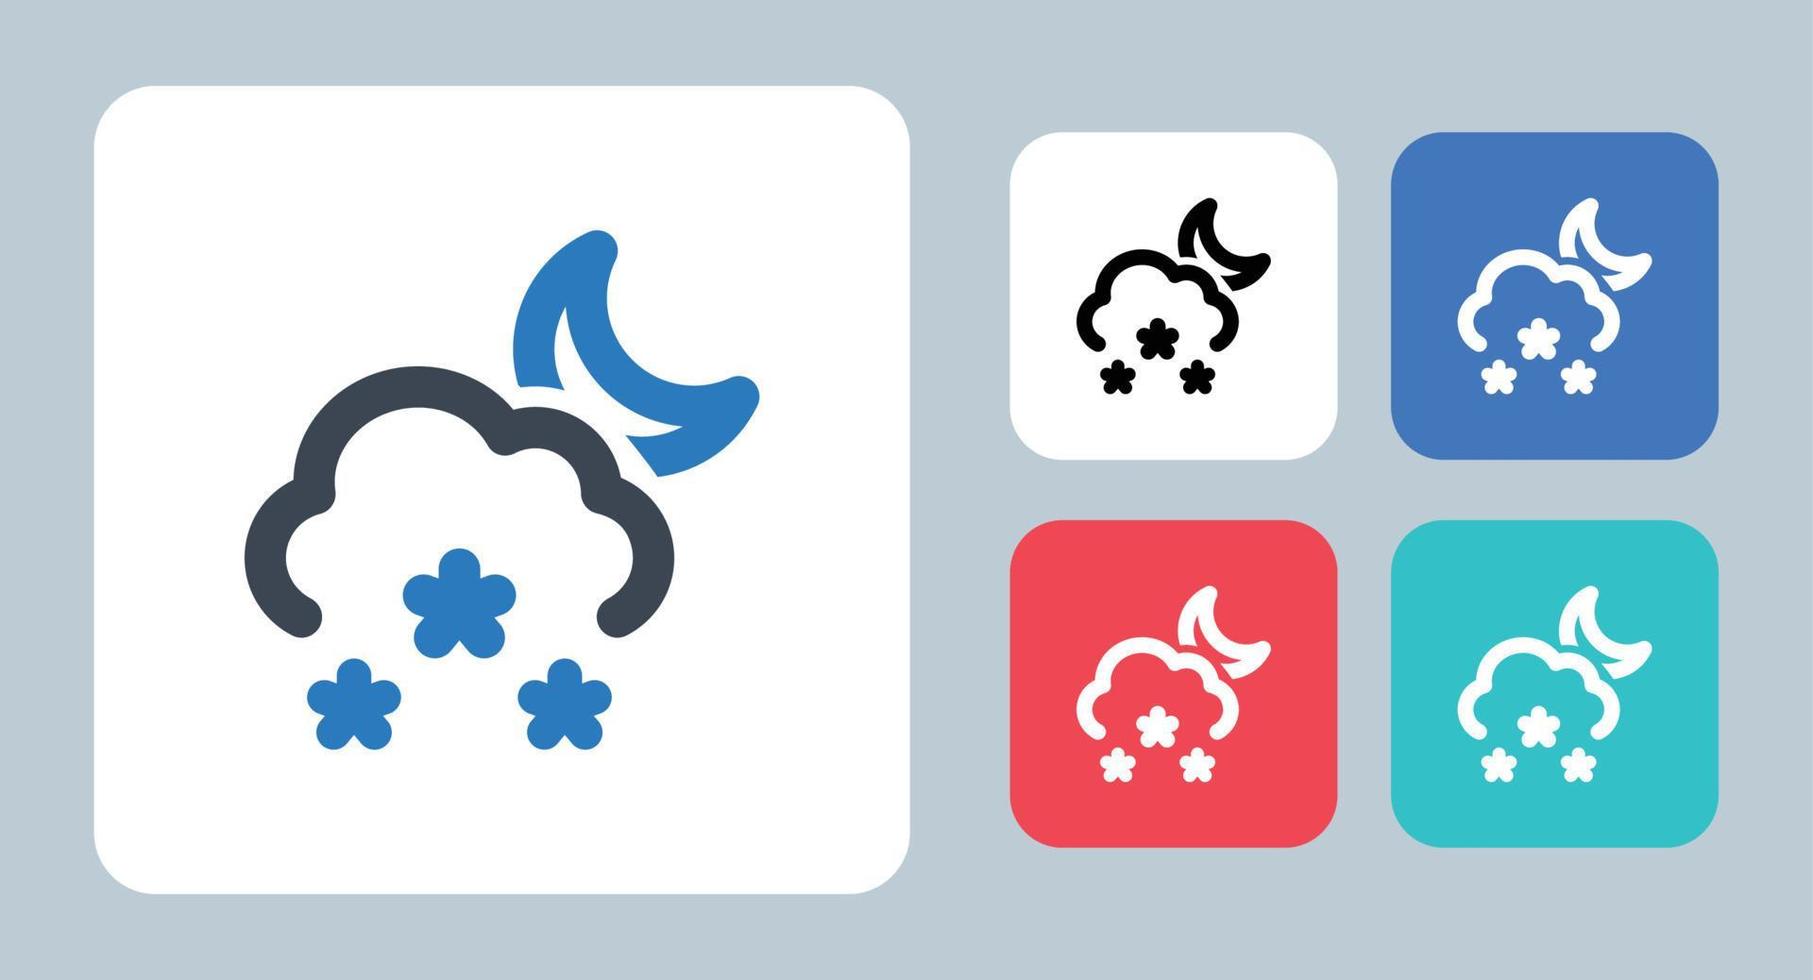 Snow icon - vector illustration . Snow, Snowflake, Night, Winter, Moon, Weather, Forecast, cold, ice, day, line, outline, flat, icons .